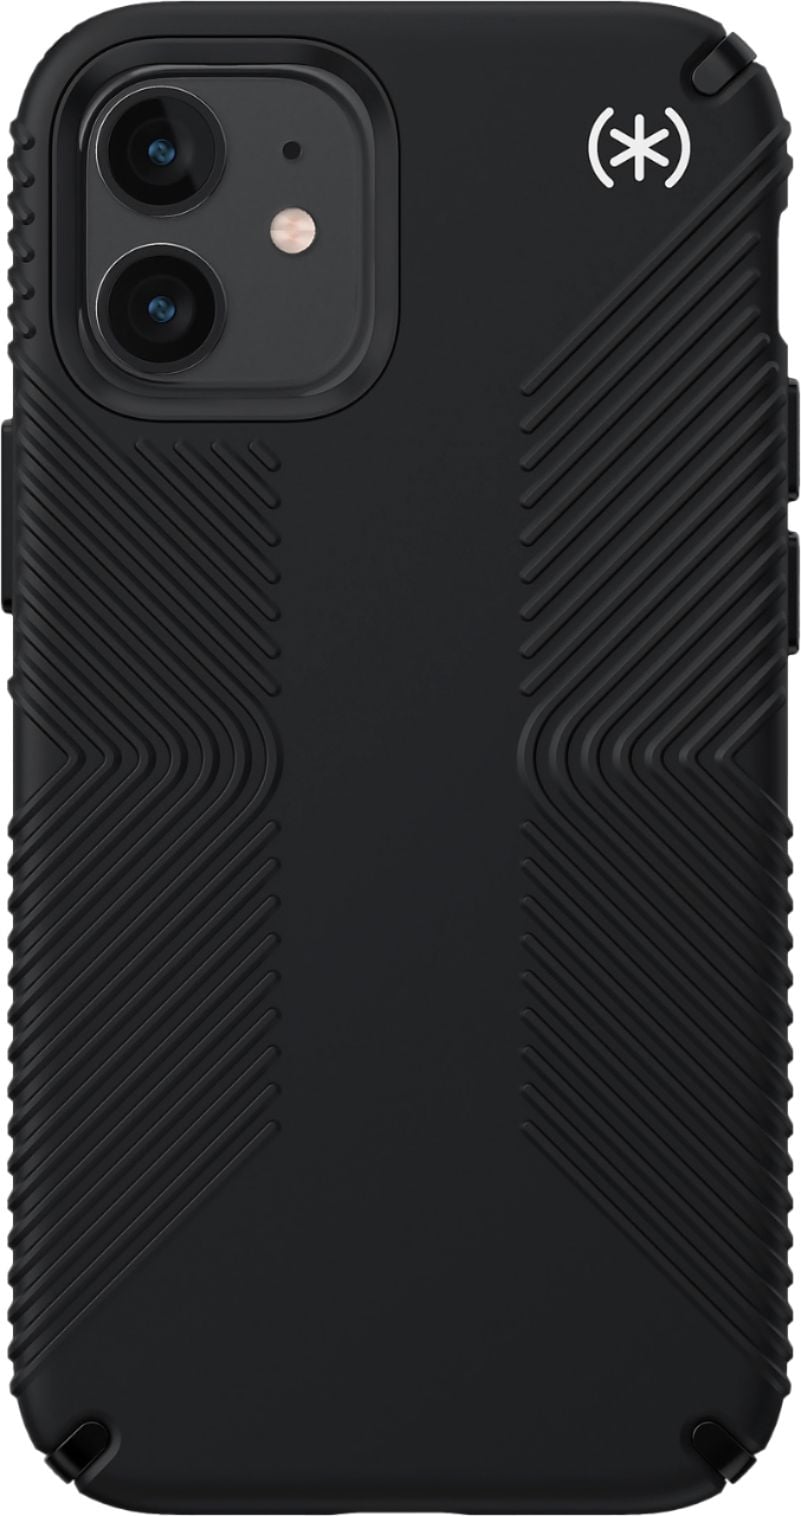 The cover of the fortress is designed with an easy grip for iPhone 12 Mini